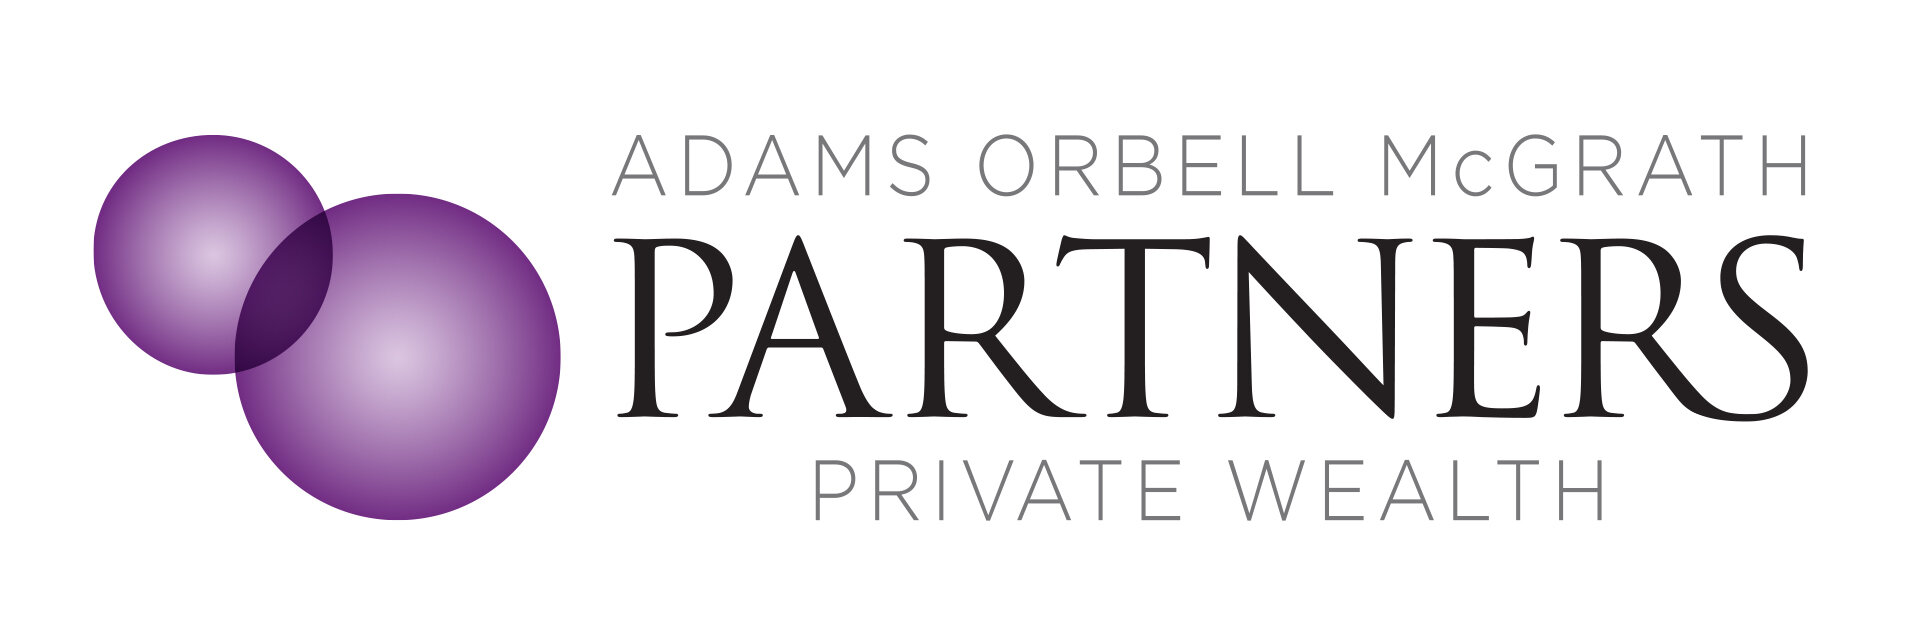 Partners Private Wealth